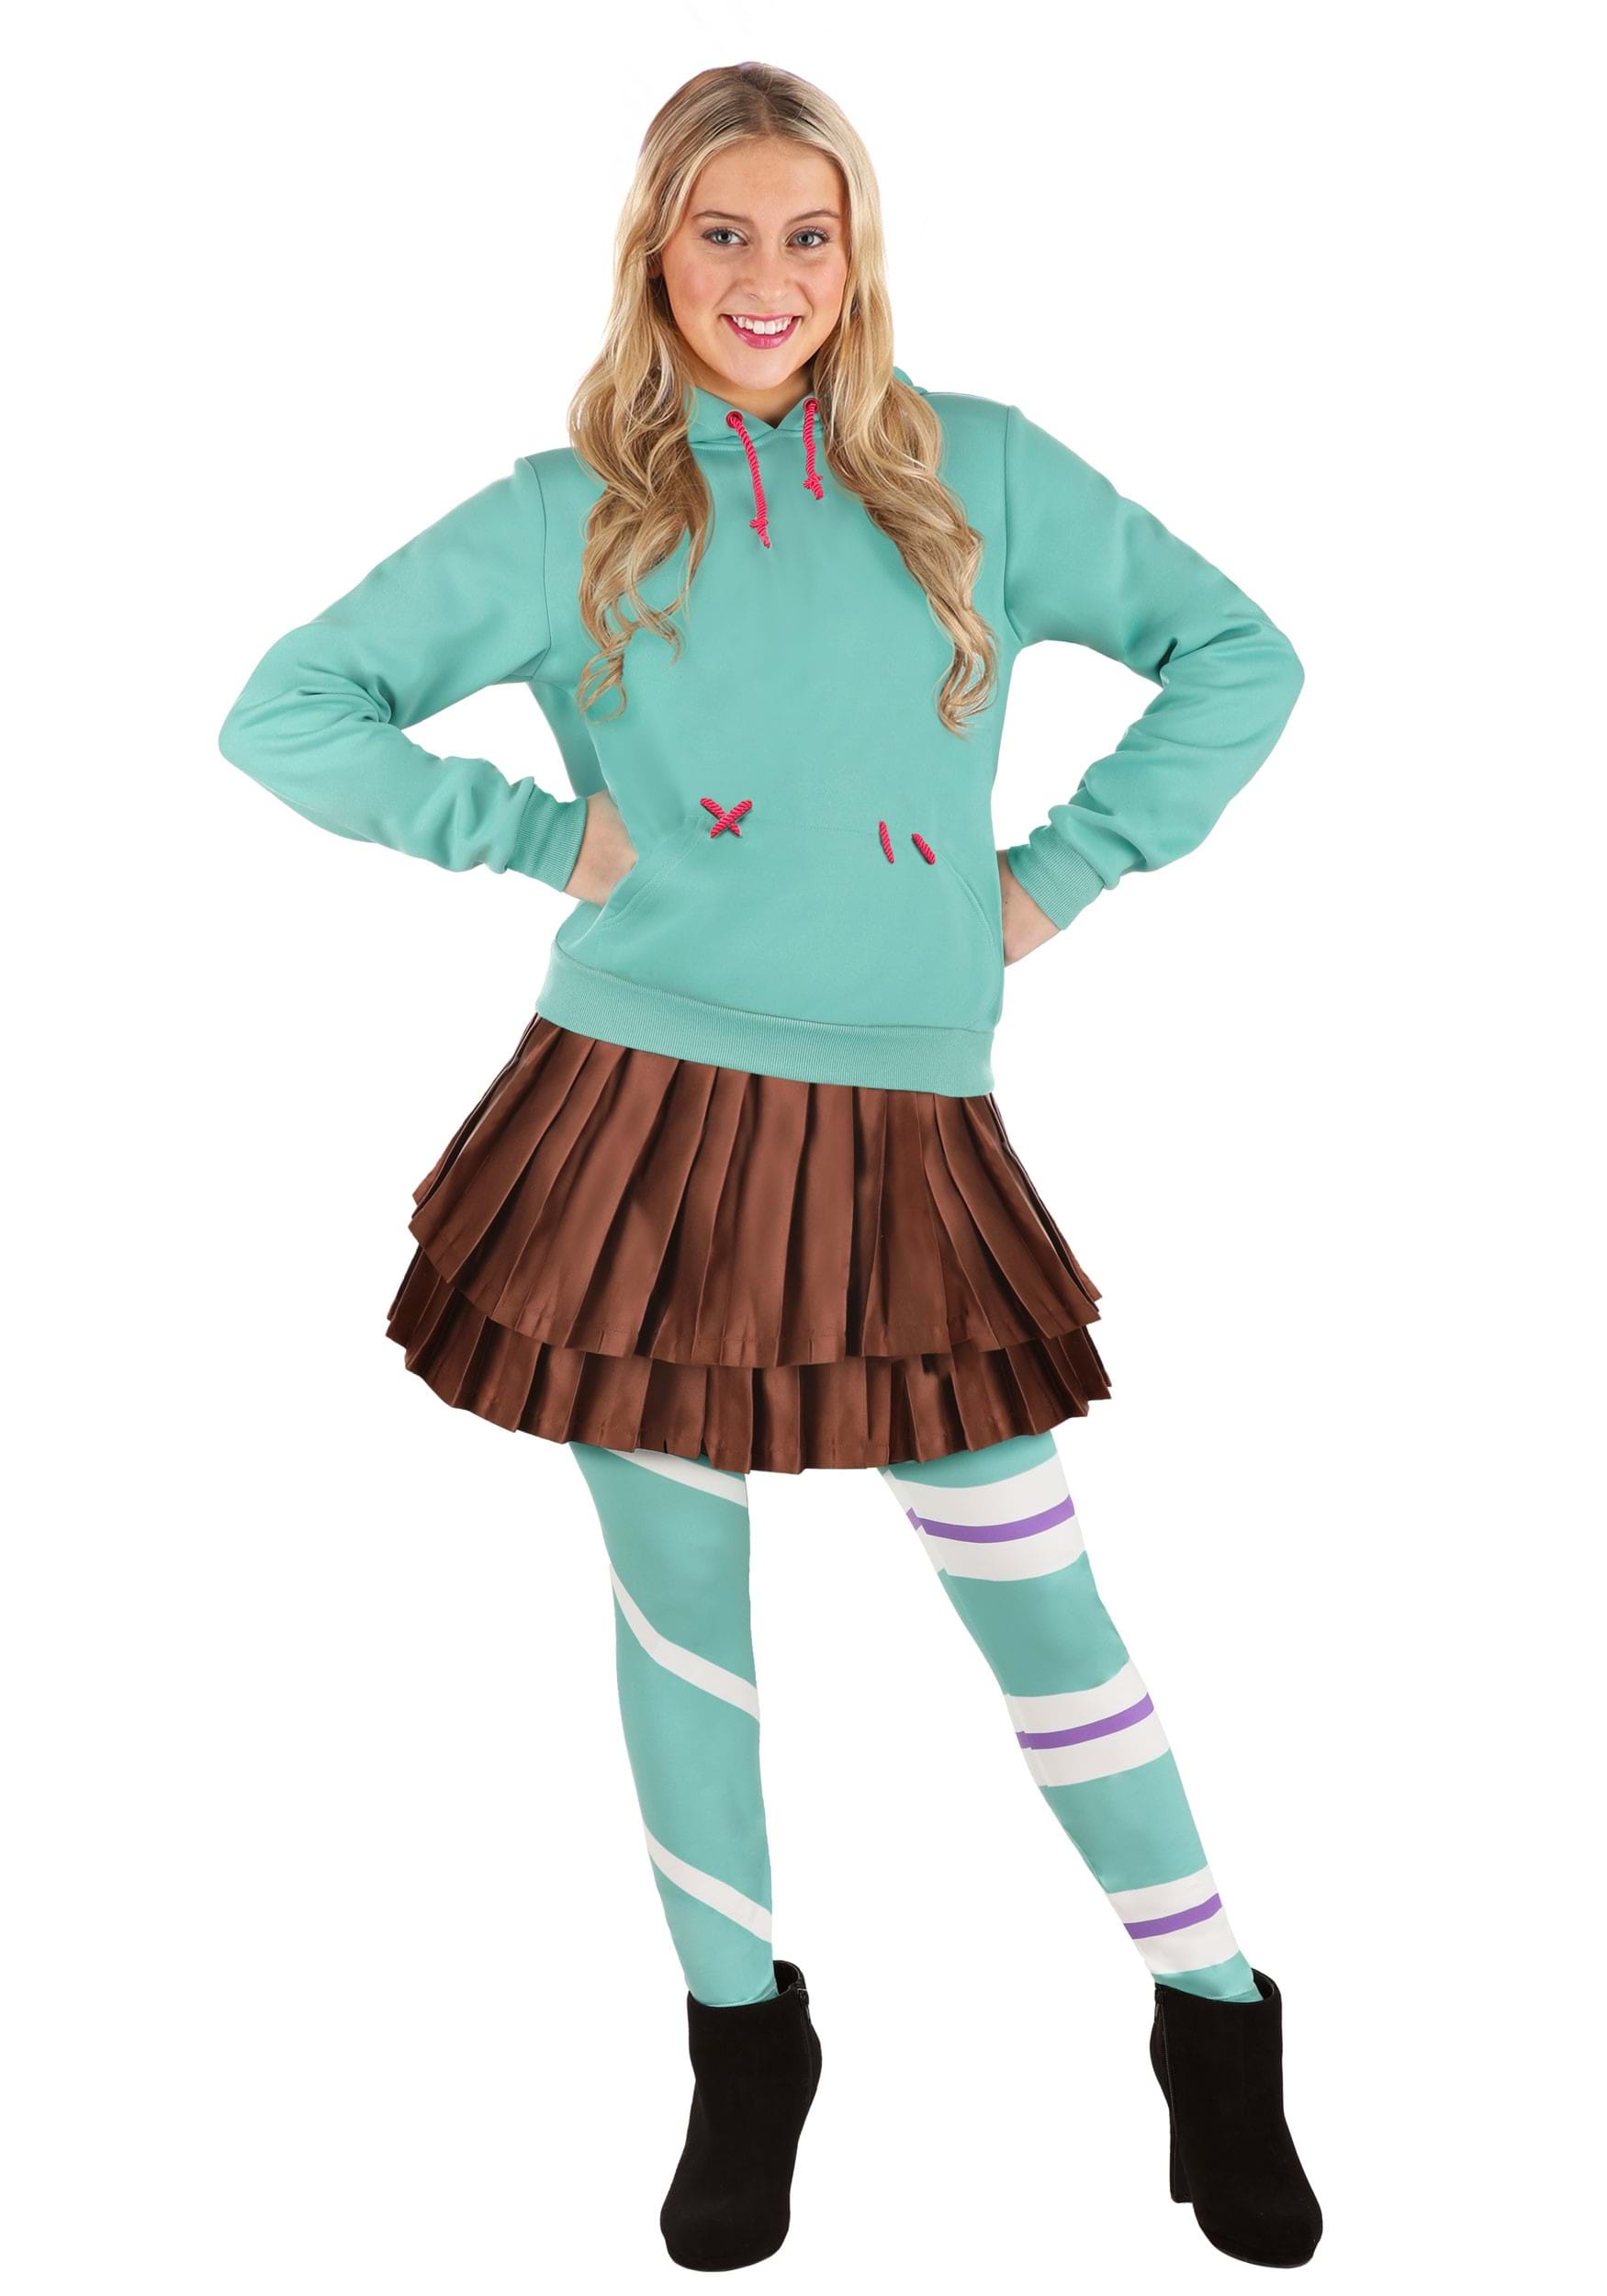 Image of Adult Vanellope Wreck It Ralph Costume ID FUN4884AD-XL